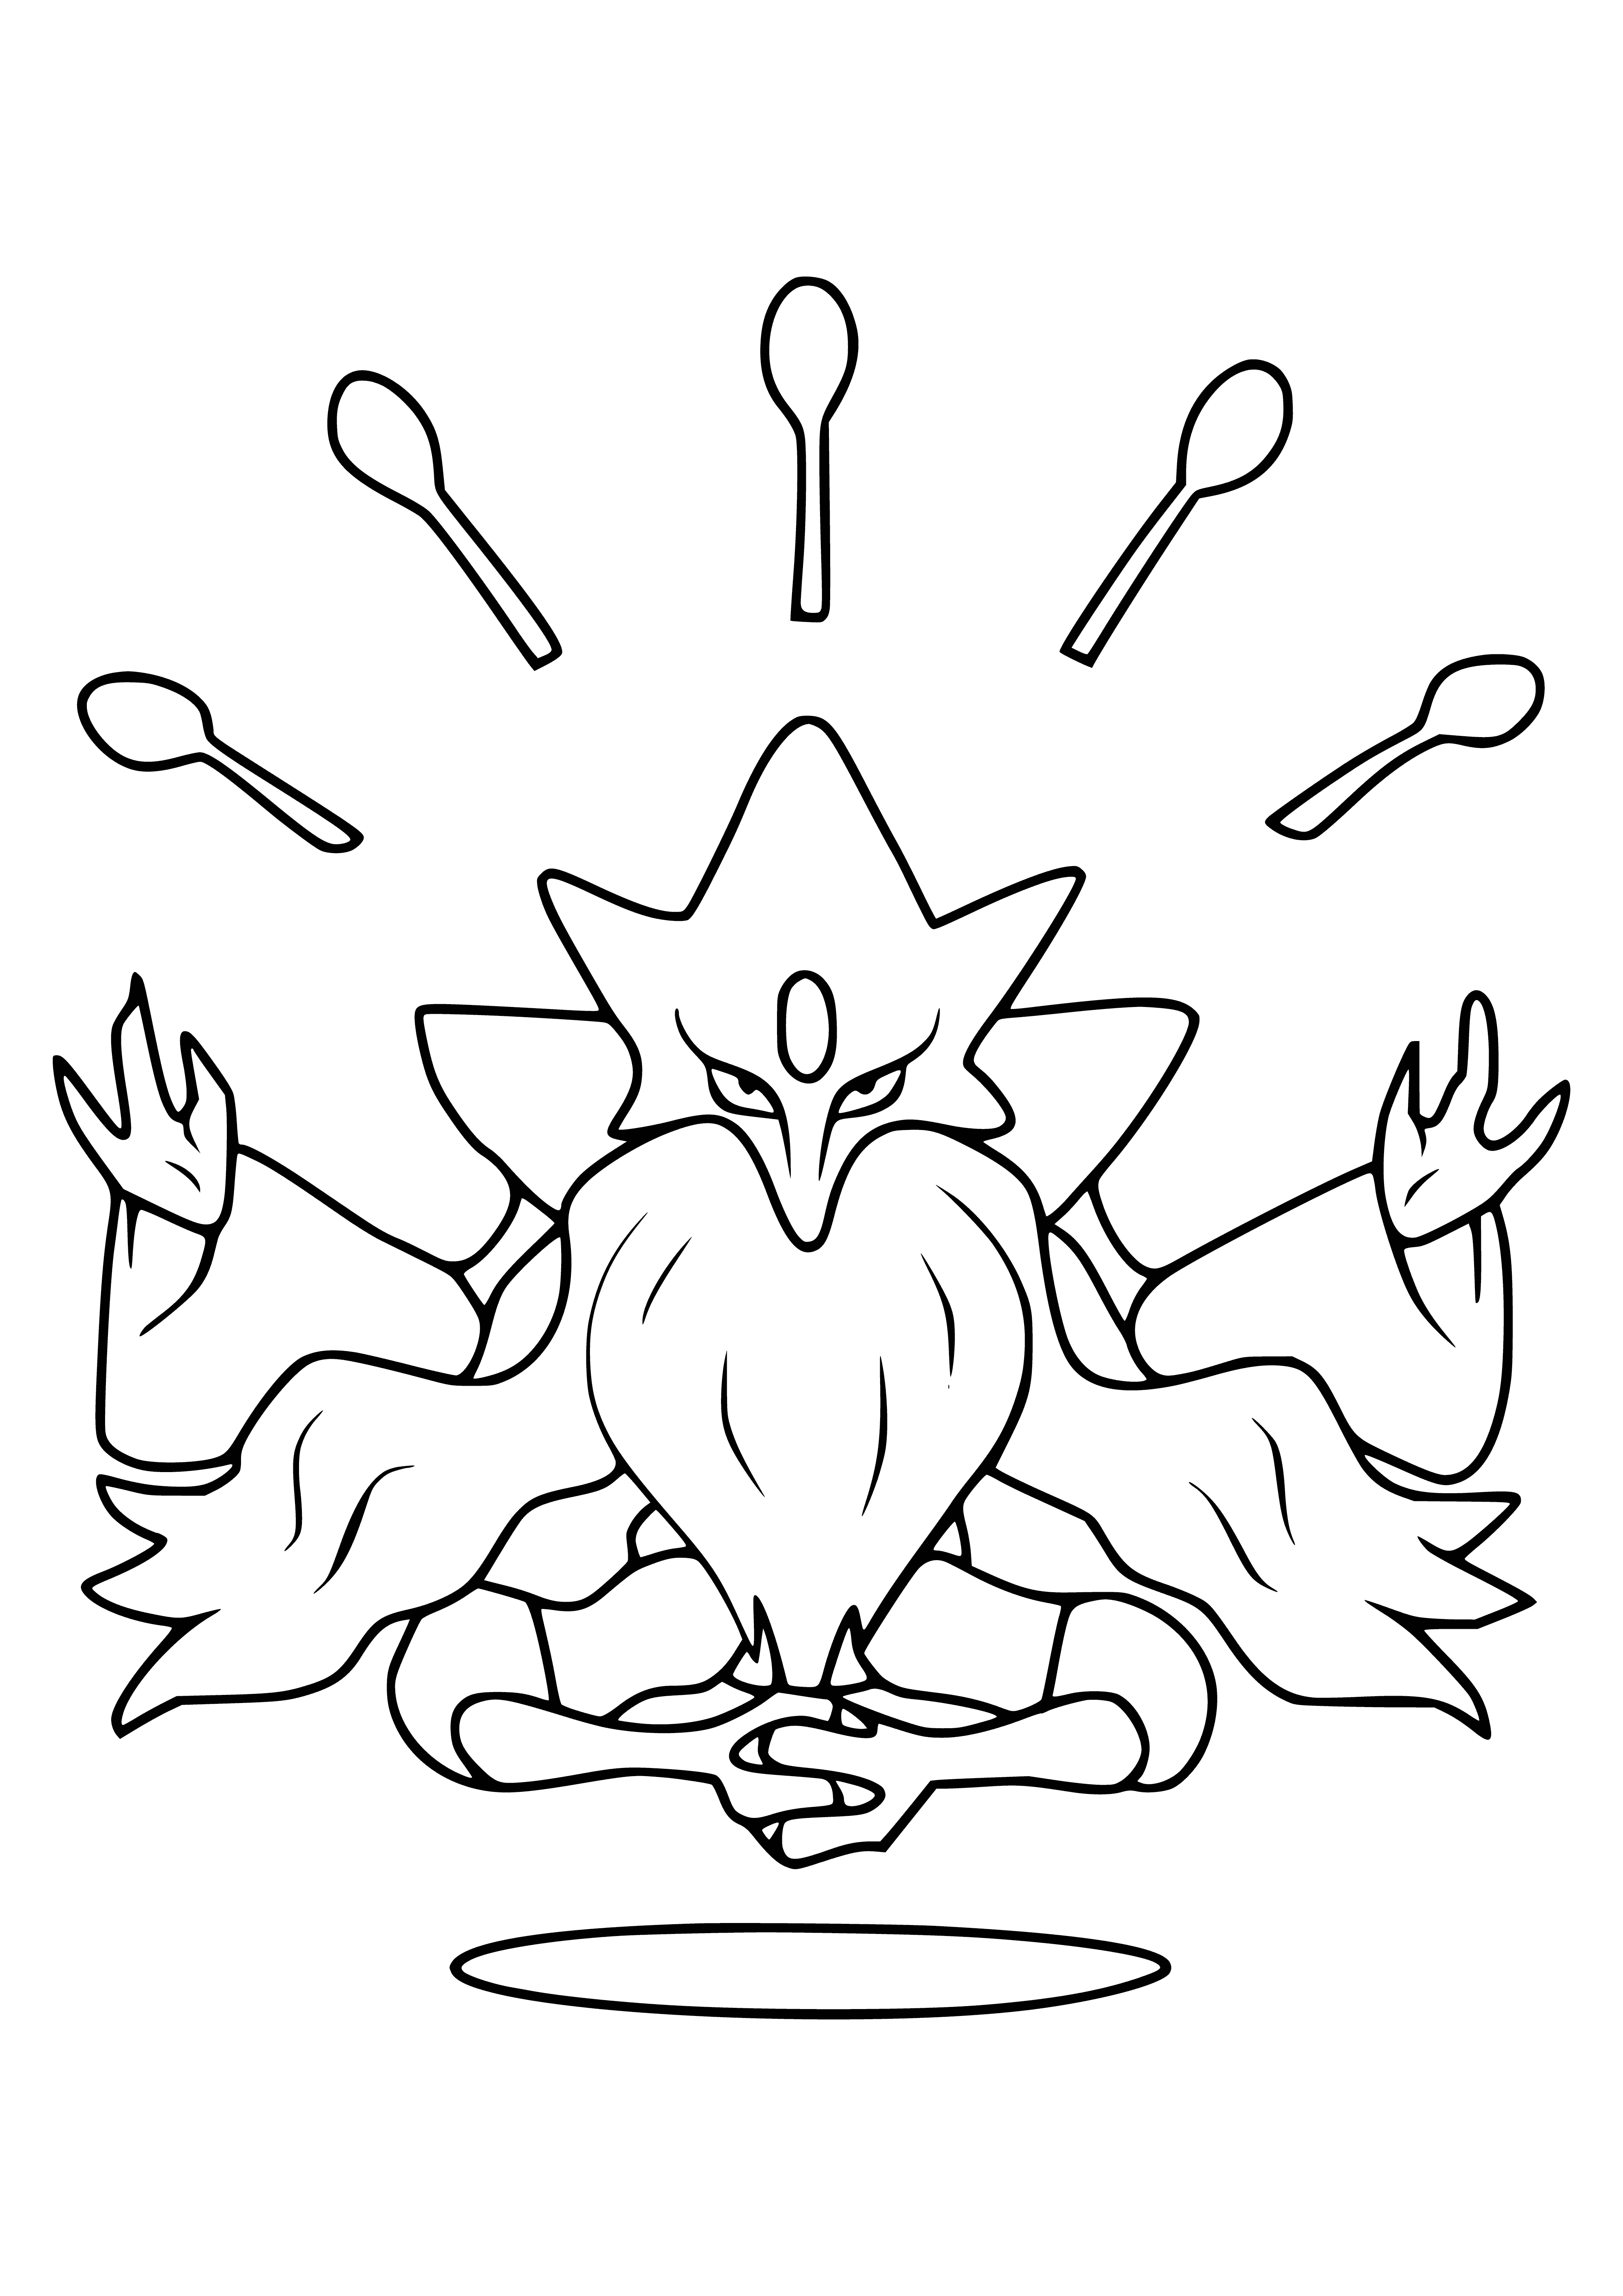 coloring page: Alakazam's massive brain levitates its head, rarely seen outside its Poké Ball. Mega Alakazam's brain is supported by four spoons on its head.